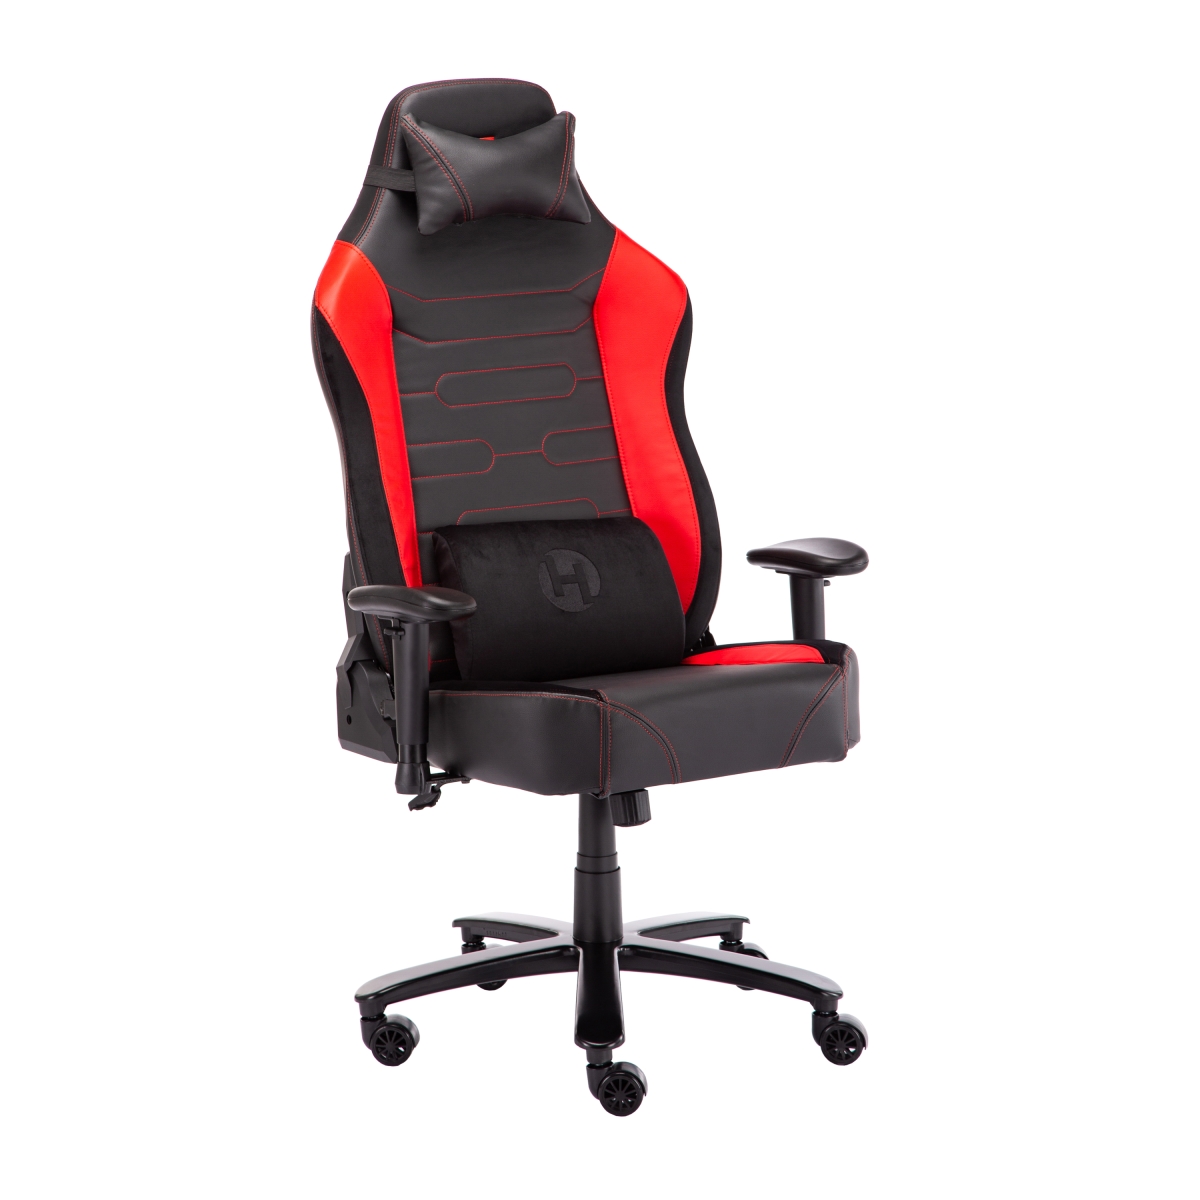 Rta-tsxxl2-red Office-pc Gaming Chair, Red - 2xl